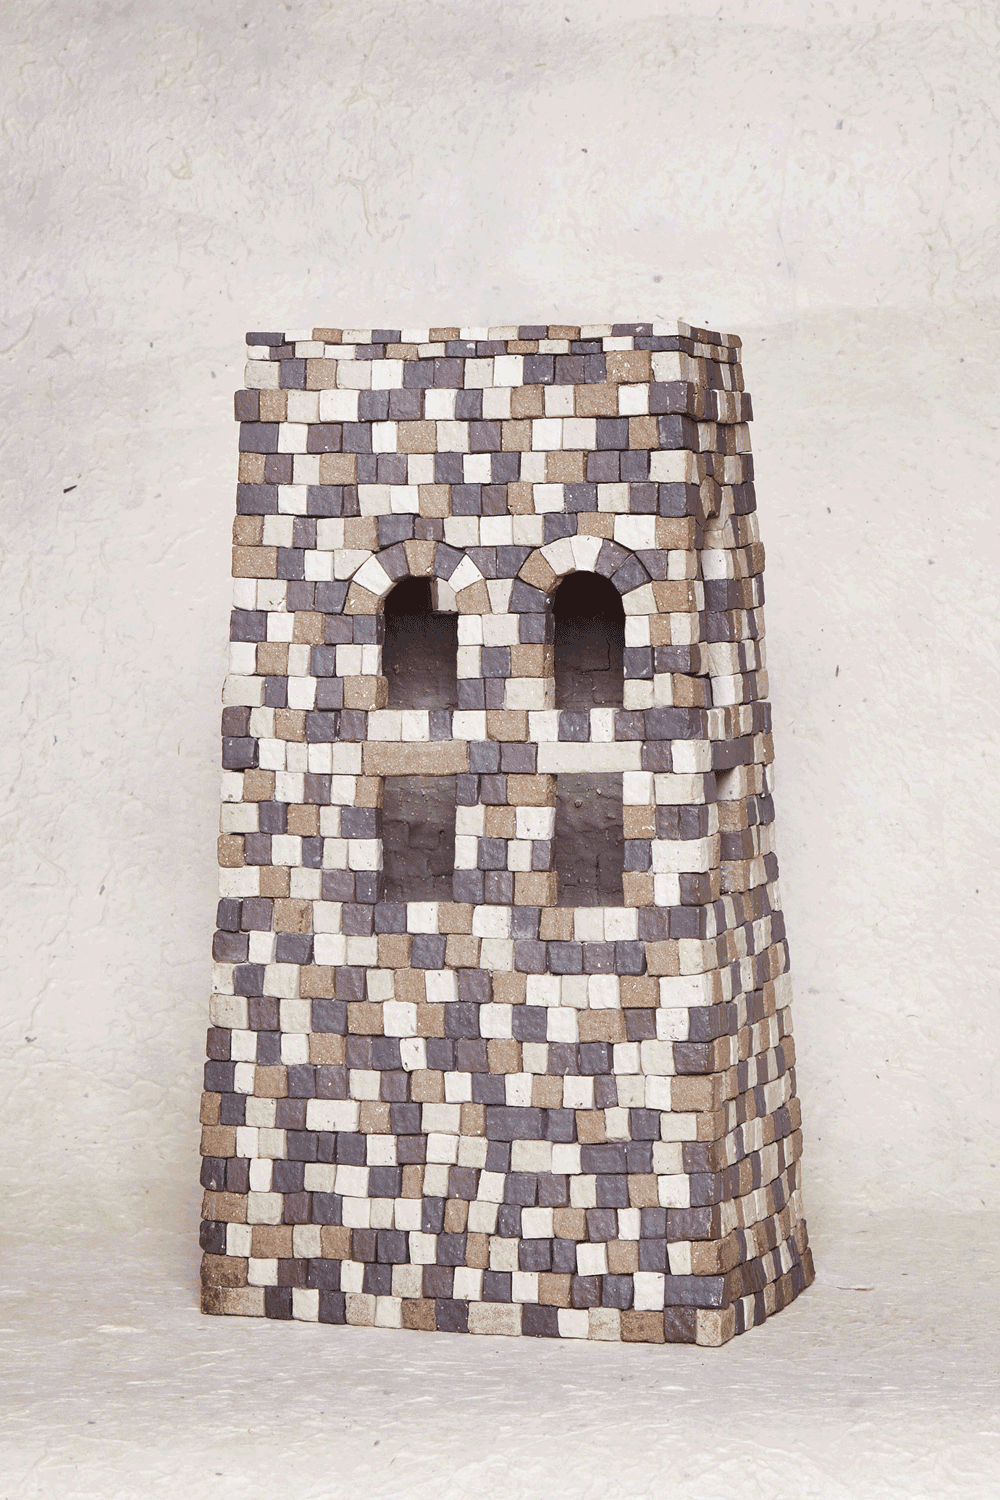 Ceramic tower house by Benjamin Dosgheas